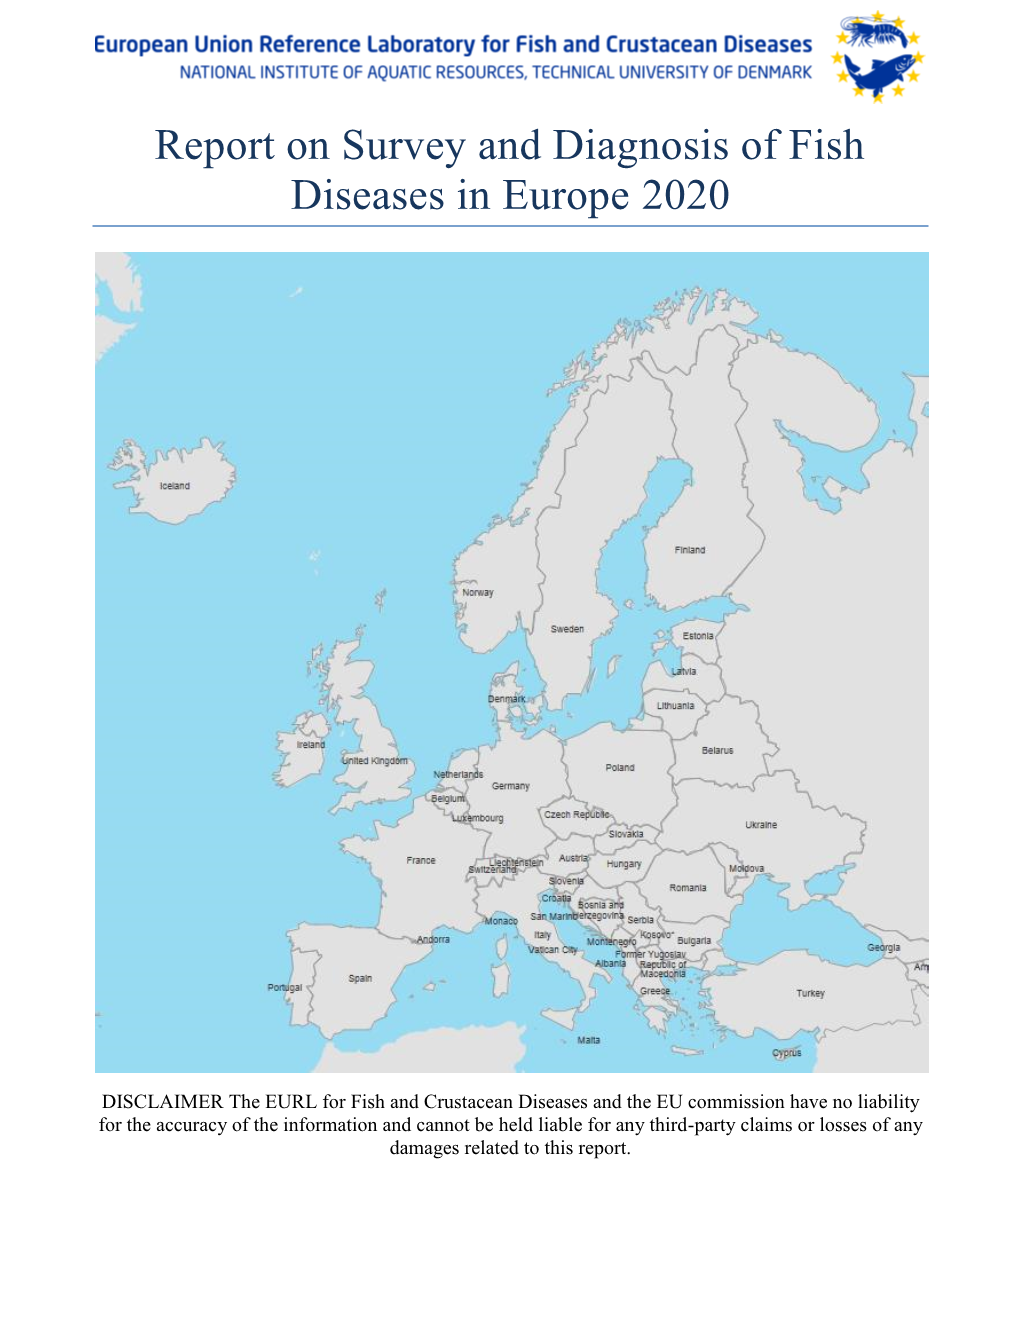 Report on Survey and Diagnosis of Fish Diseases in Europe 2020